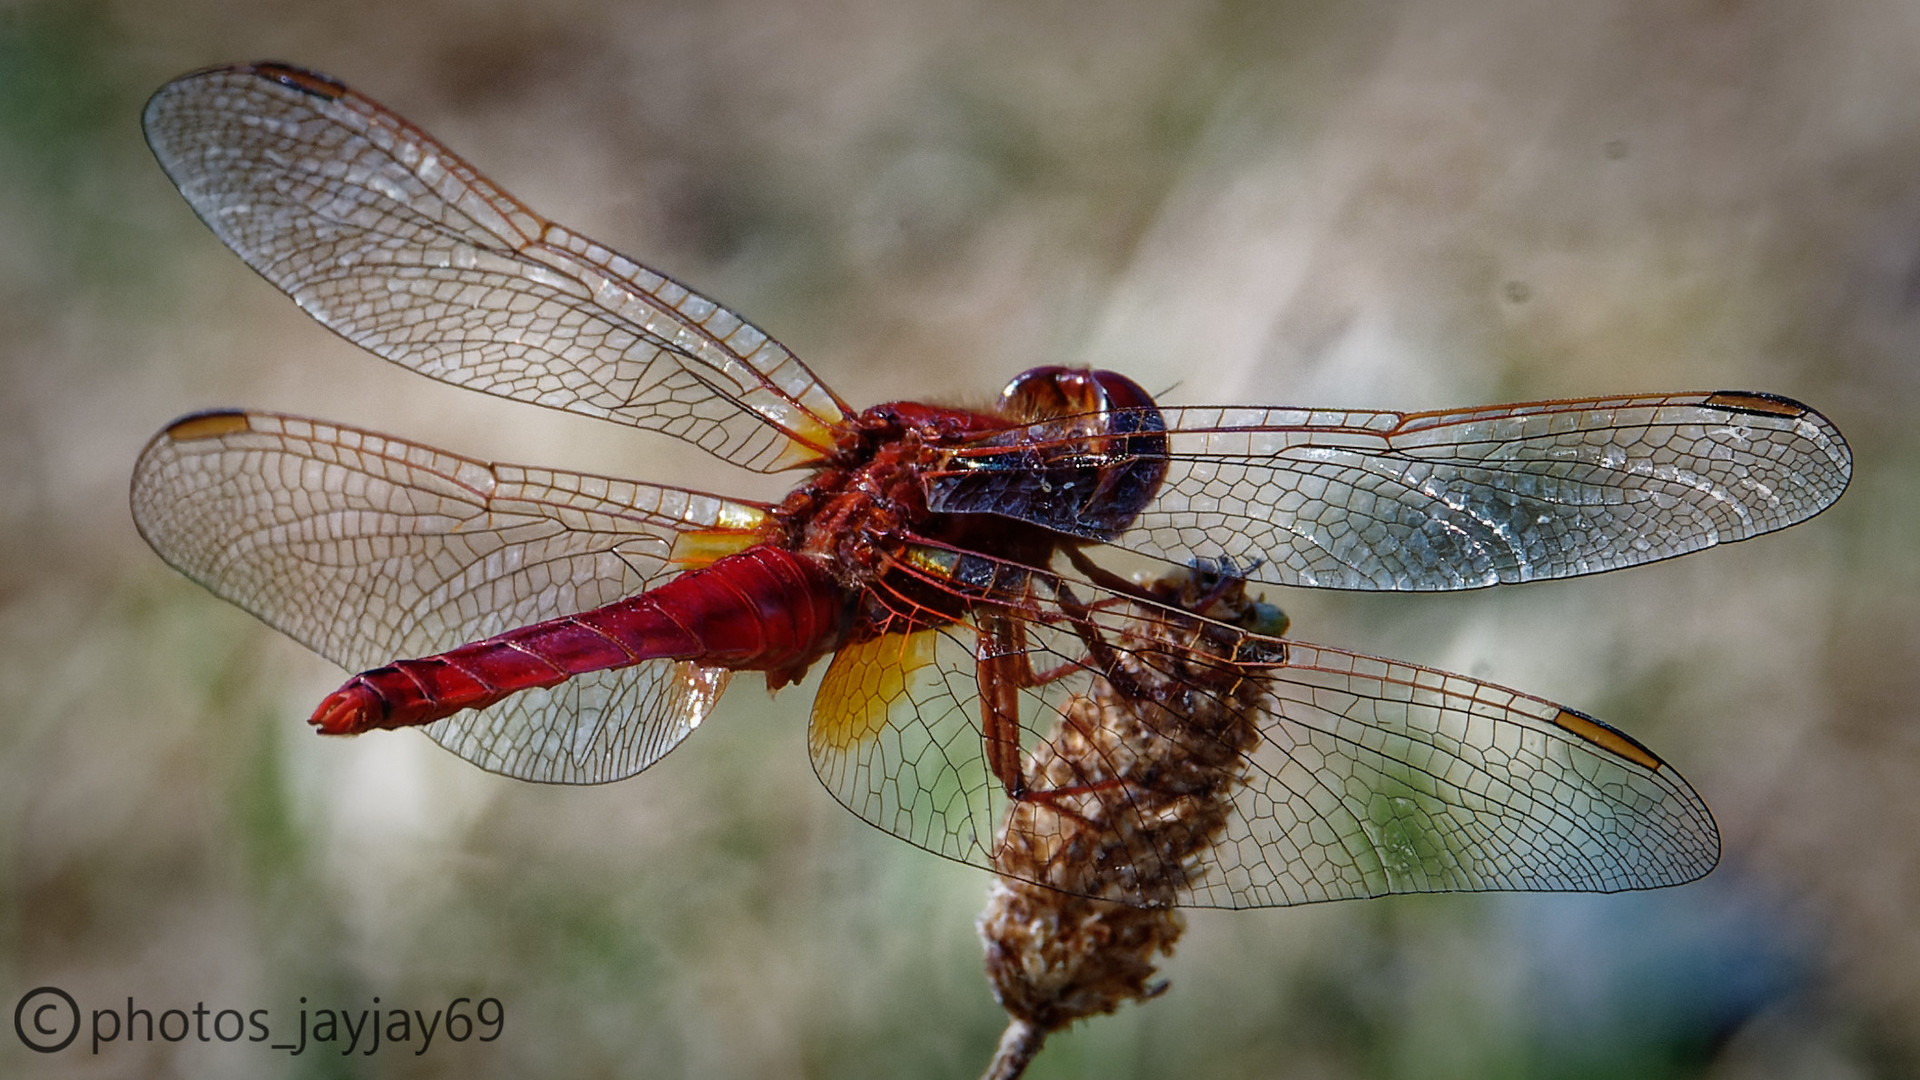 Die Feuerlibelle/The Fire Dragonfly